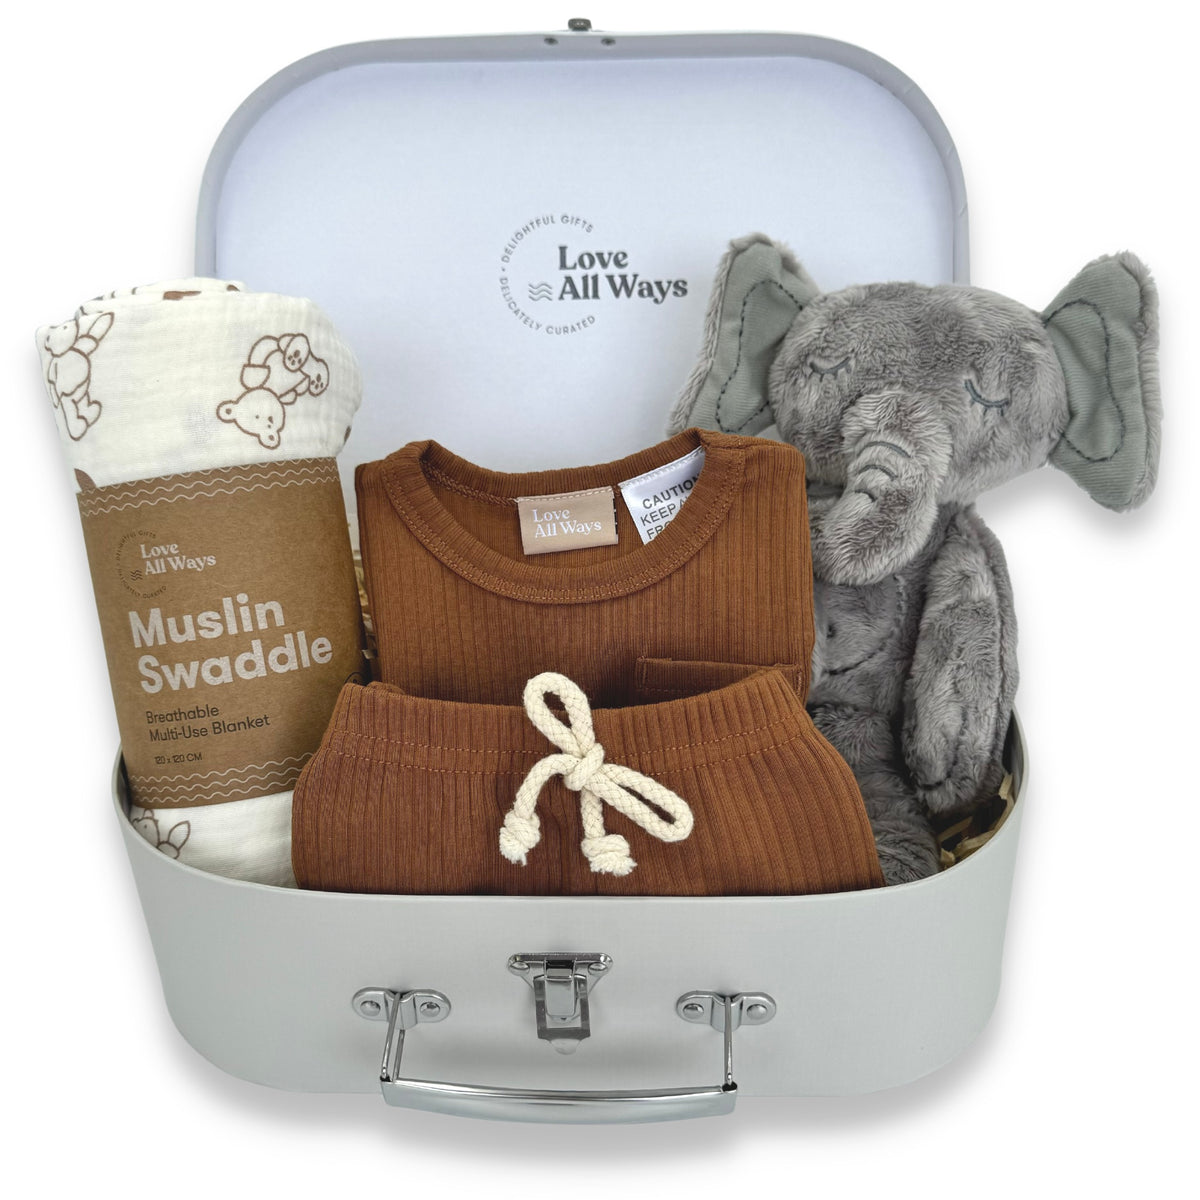 Long hot days and warmer nights. This summer loungewear inspired organic baby hamper makes the perfect gift for that someone special. Delivered free.